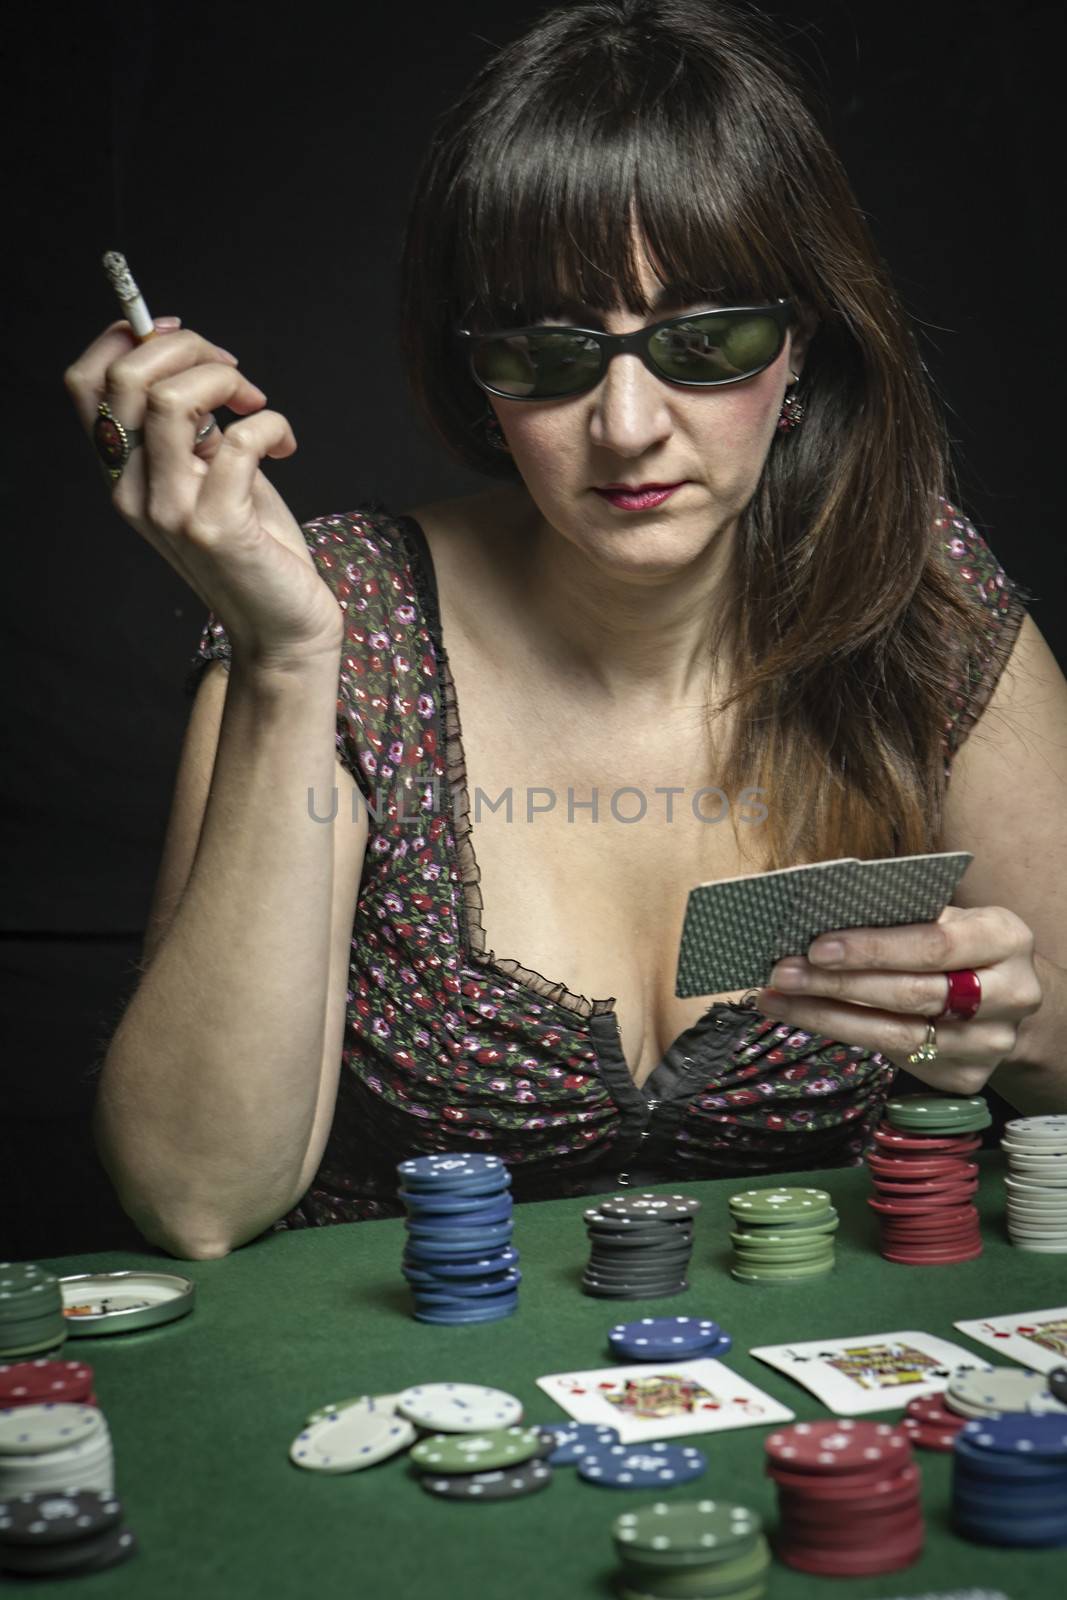 Sexy Woman with cigarette and sunglasses bet in a poker game by digicomphoto